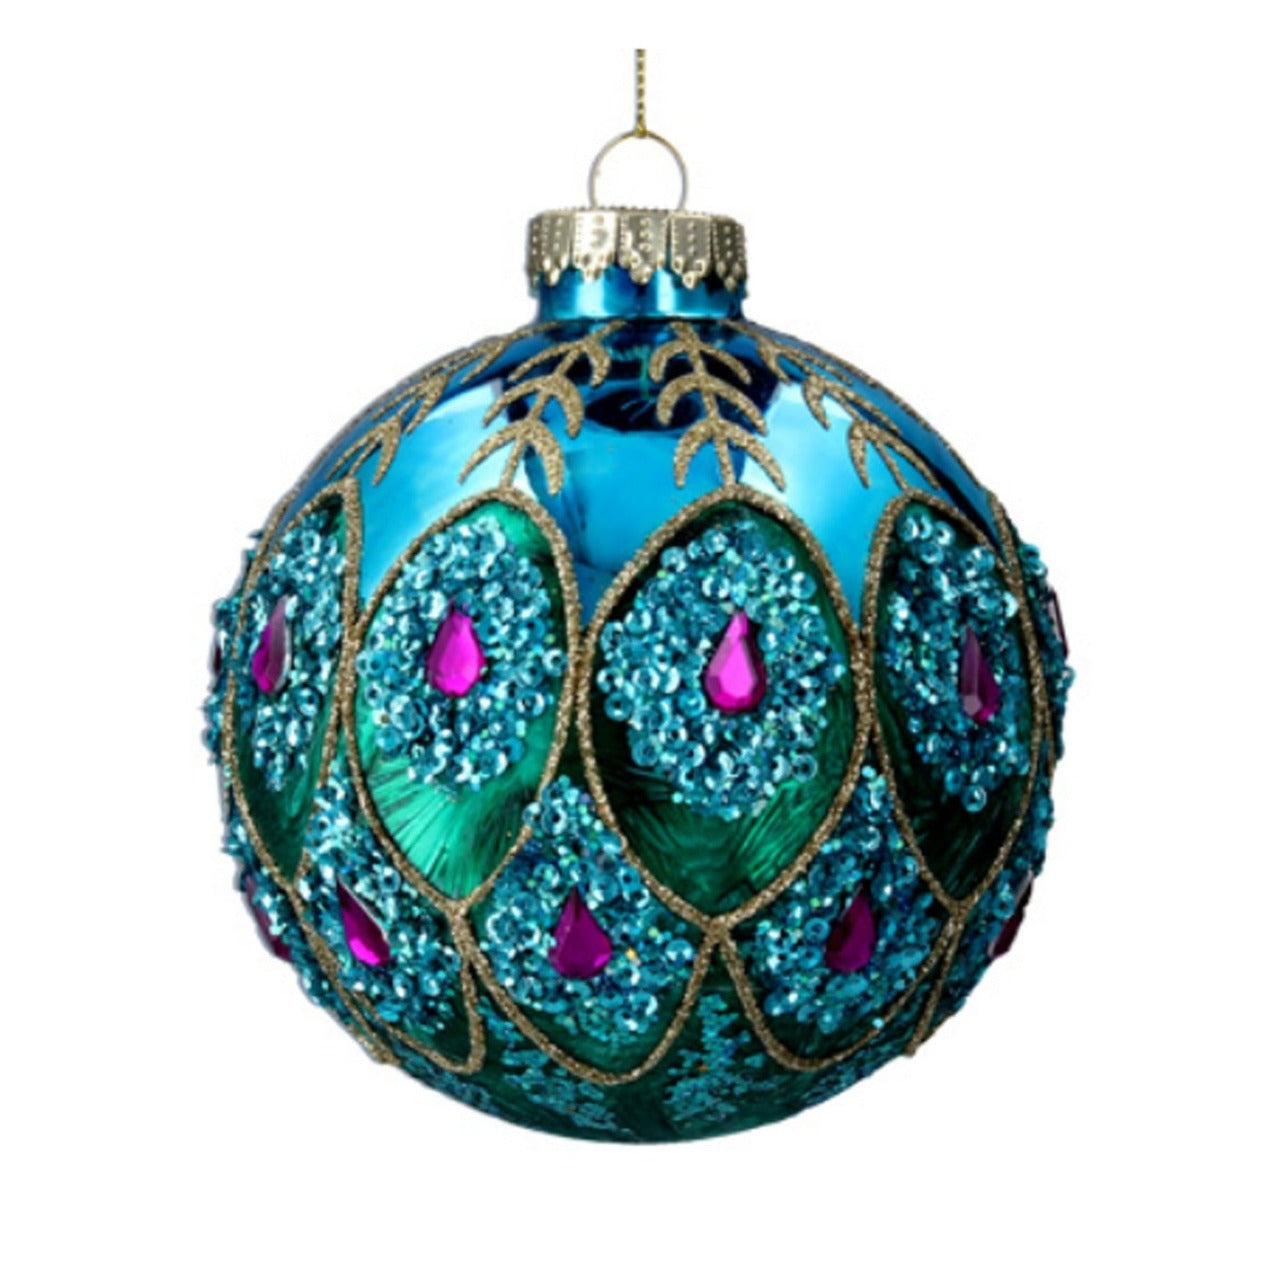 Gisela Graham Turquoise Gold Peacock Bauble Christmas Hanging Ornament  Browse our beautiful range of luxury Christmas tree decorations, baubles & ornaments for your tree this Christmas.